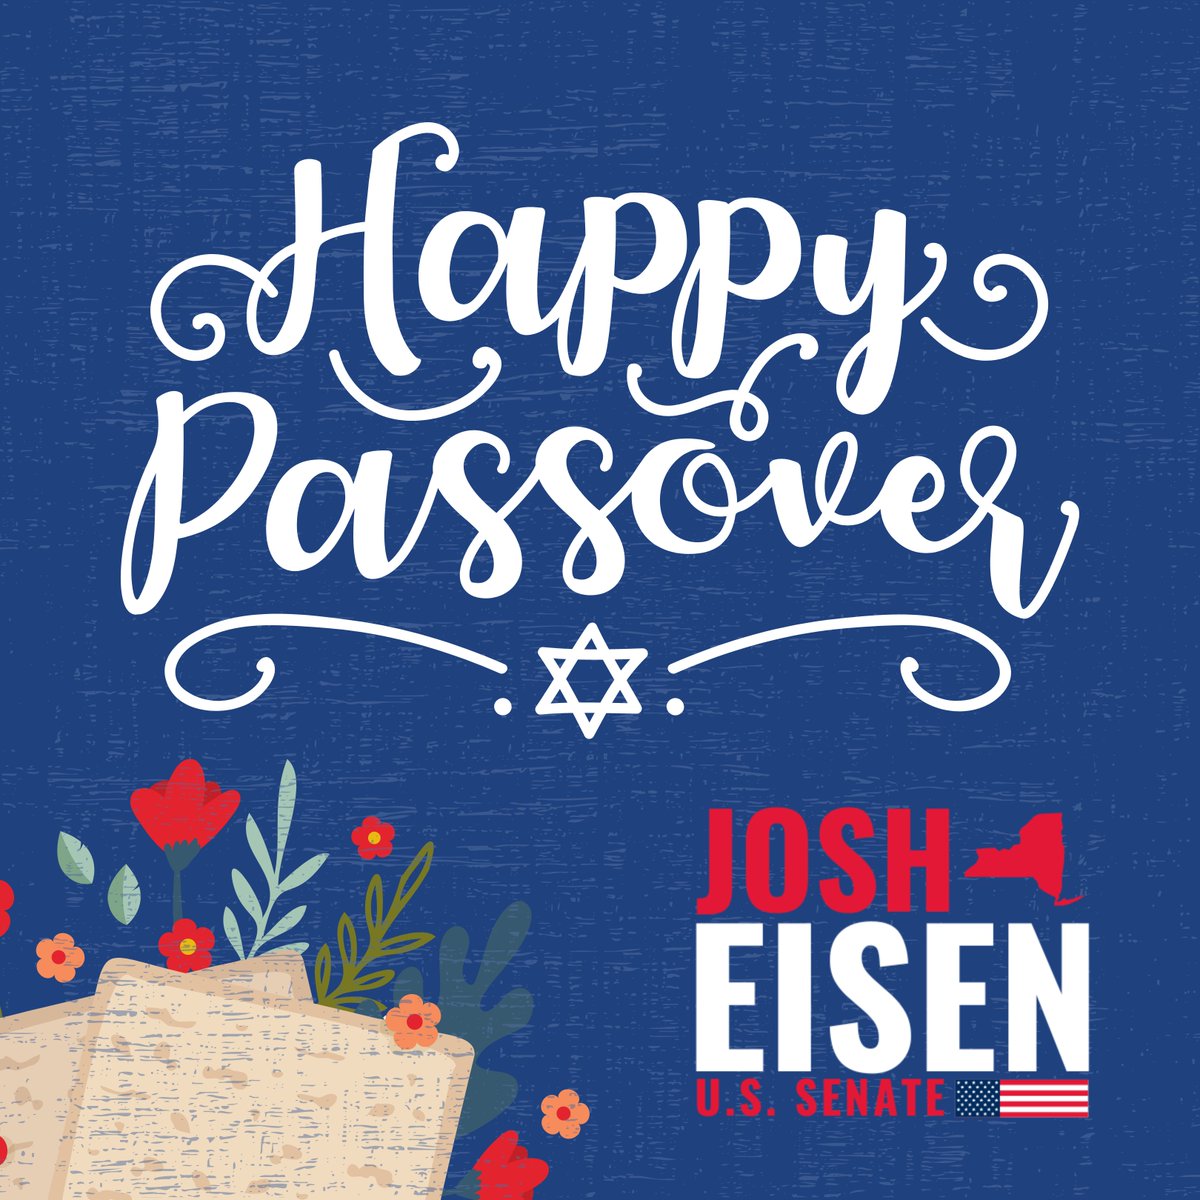 From my family to yours, I wish you a joyful #Passover! As Jews across New York and around the world gather at the Seder table, let us reflect on the resilience and unity of our ancestors and pray for a future of freedom and peace. #ChagSameach